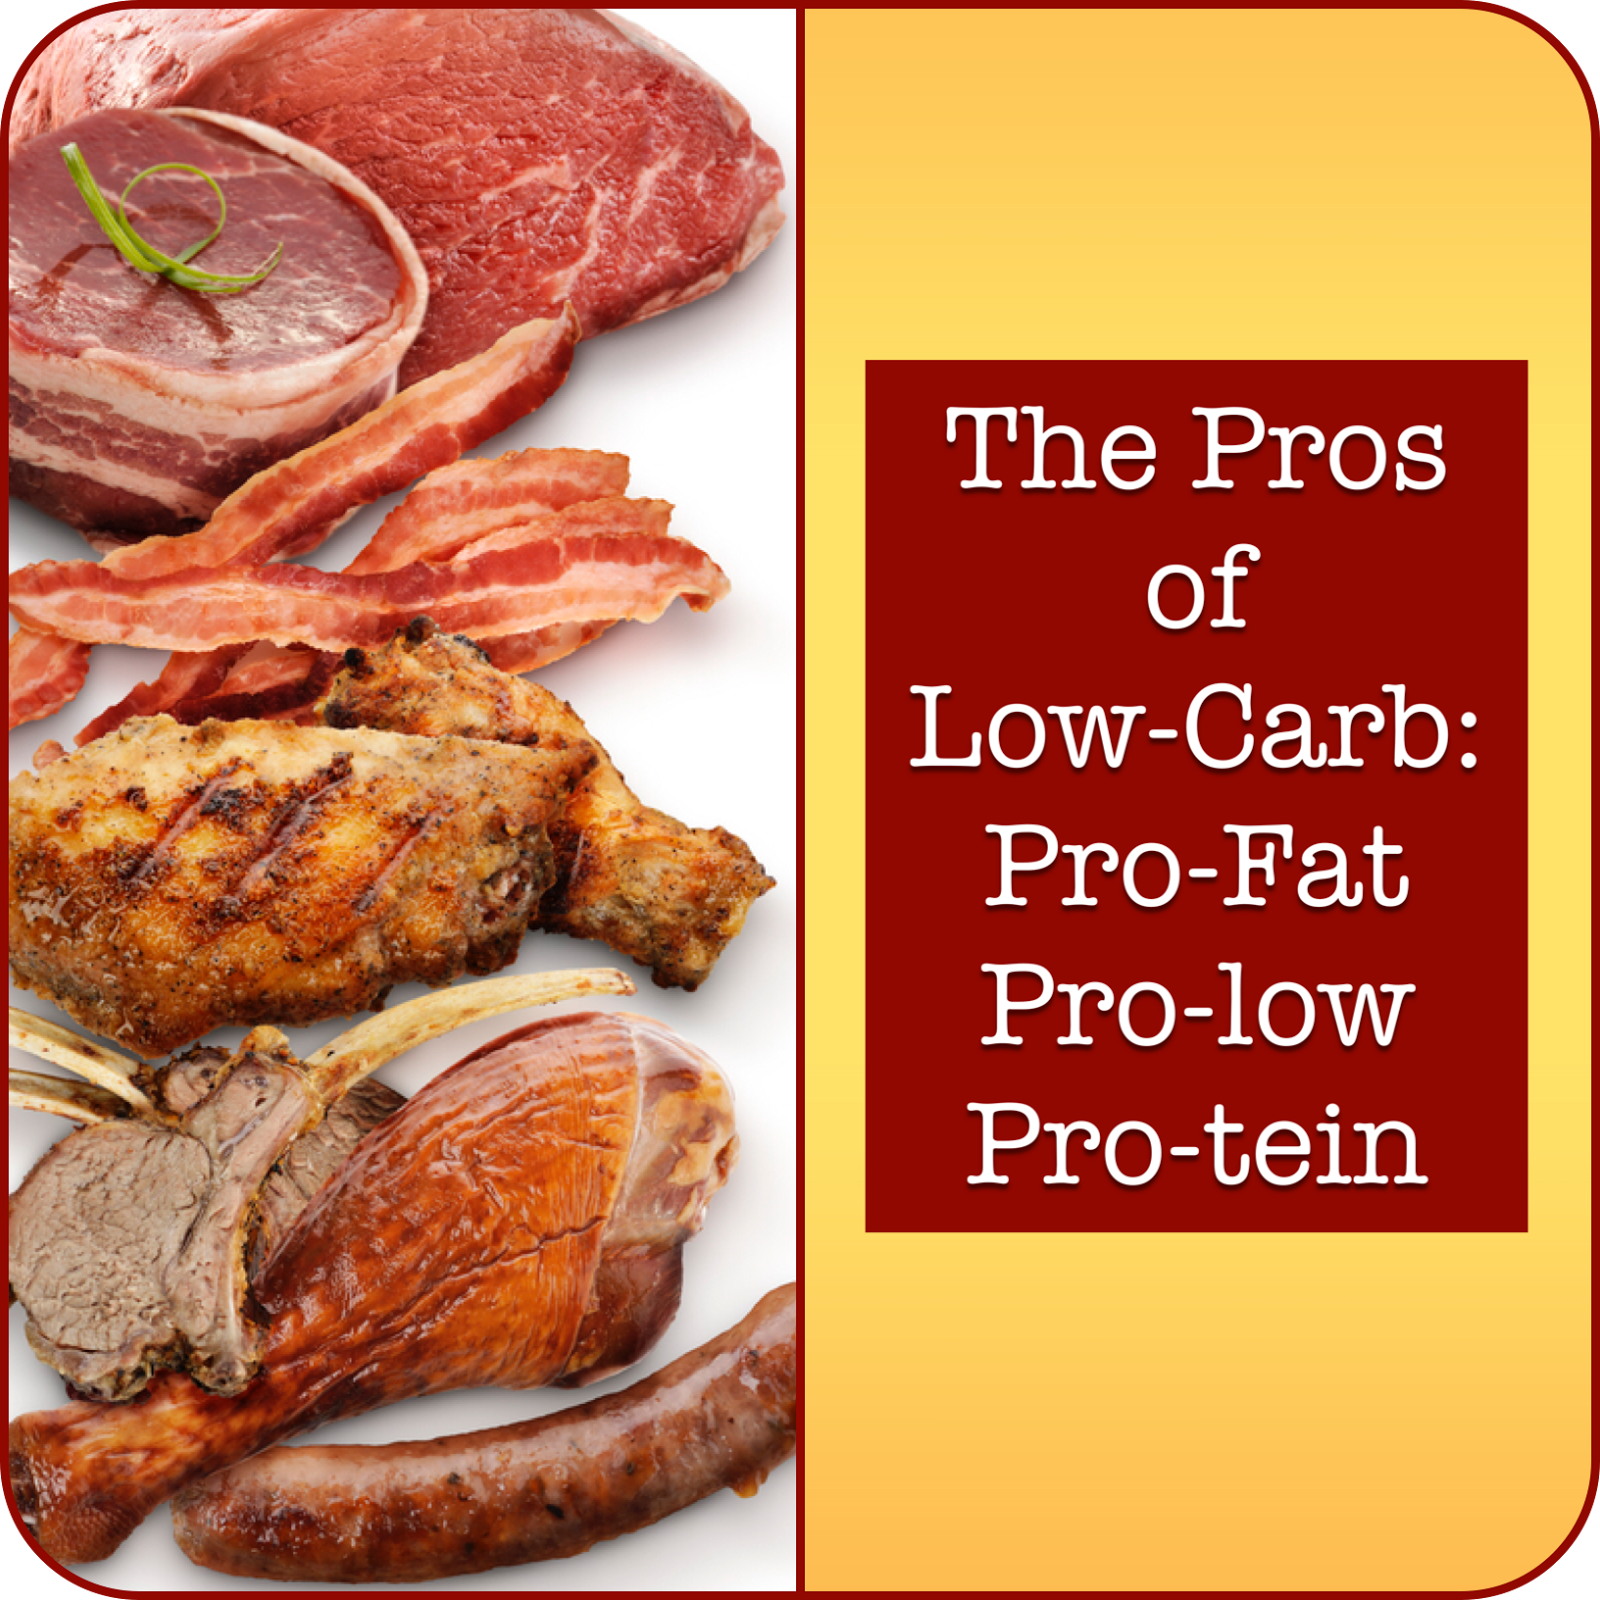 THE PROS OF LOW-CARB